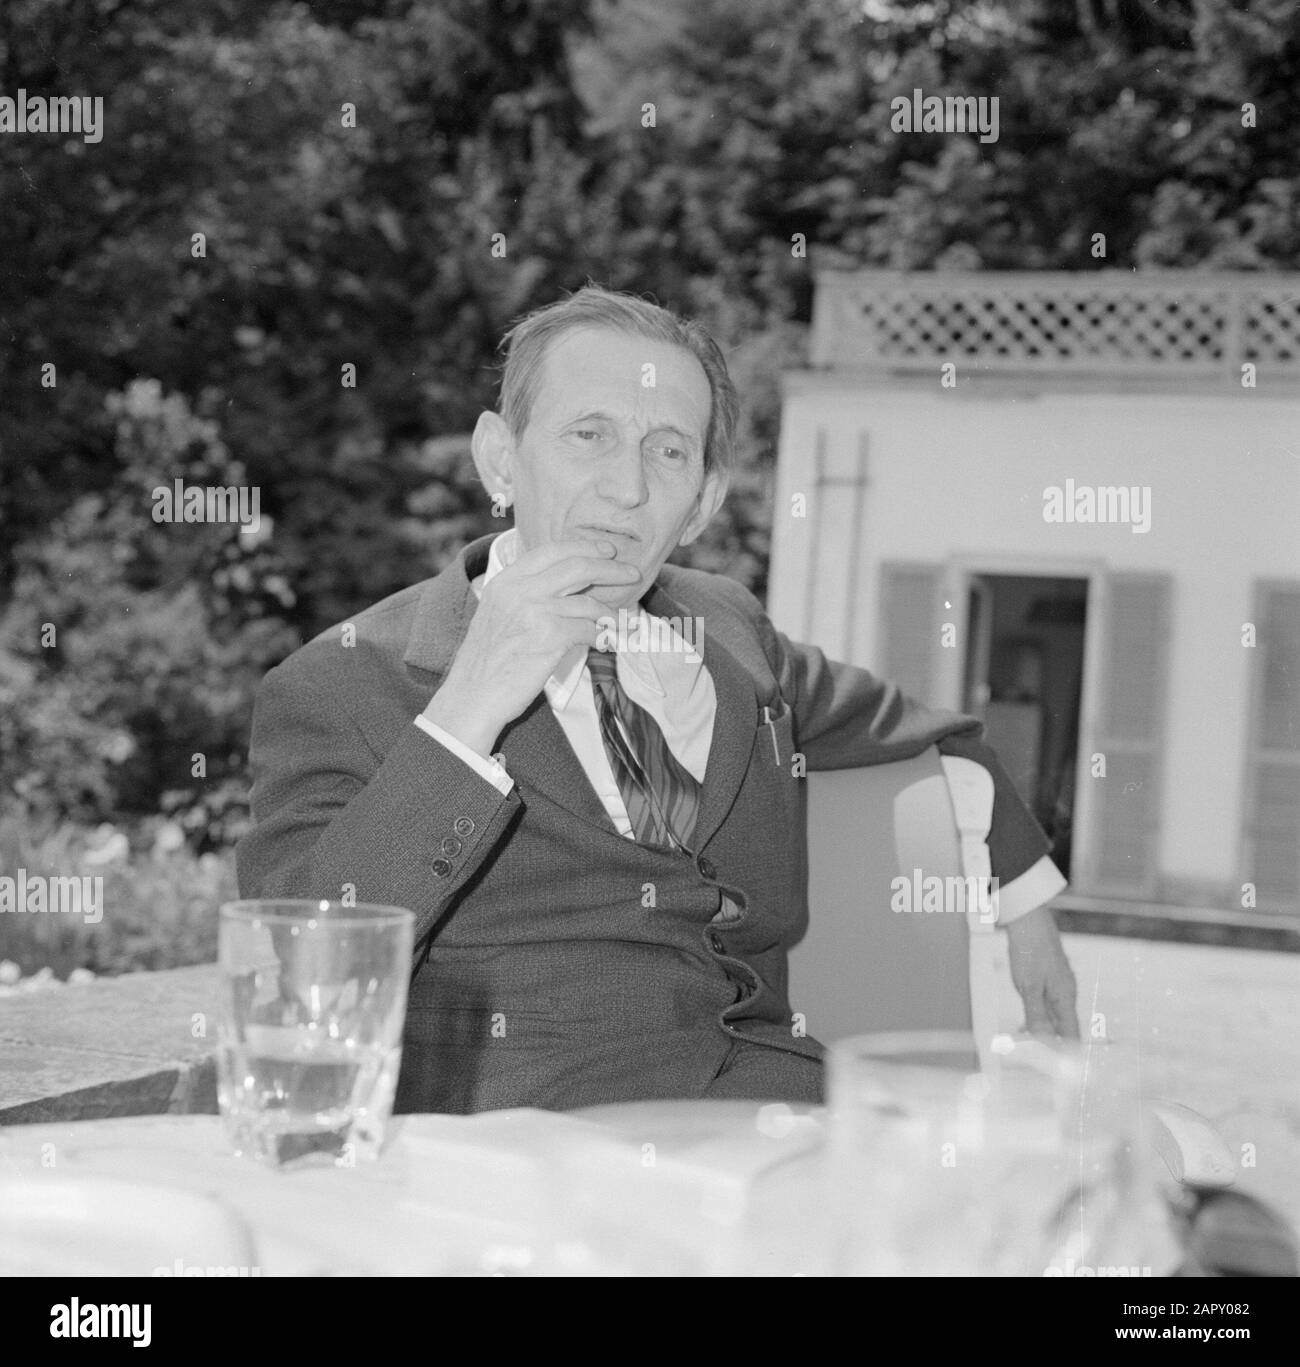 Visiting in Icking Walter Mehring sitting on a terrace Date: June 1964  Location: Germany, Munich, West Germany Keywords: drinks, furniture,  writers, crockery, terraces, gardens, housing Personal name: Mehring, Walter  Stock Photo - Alamy